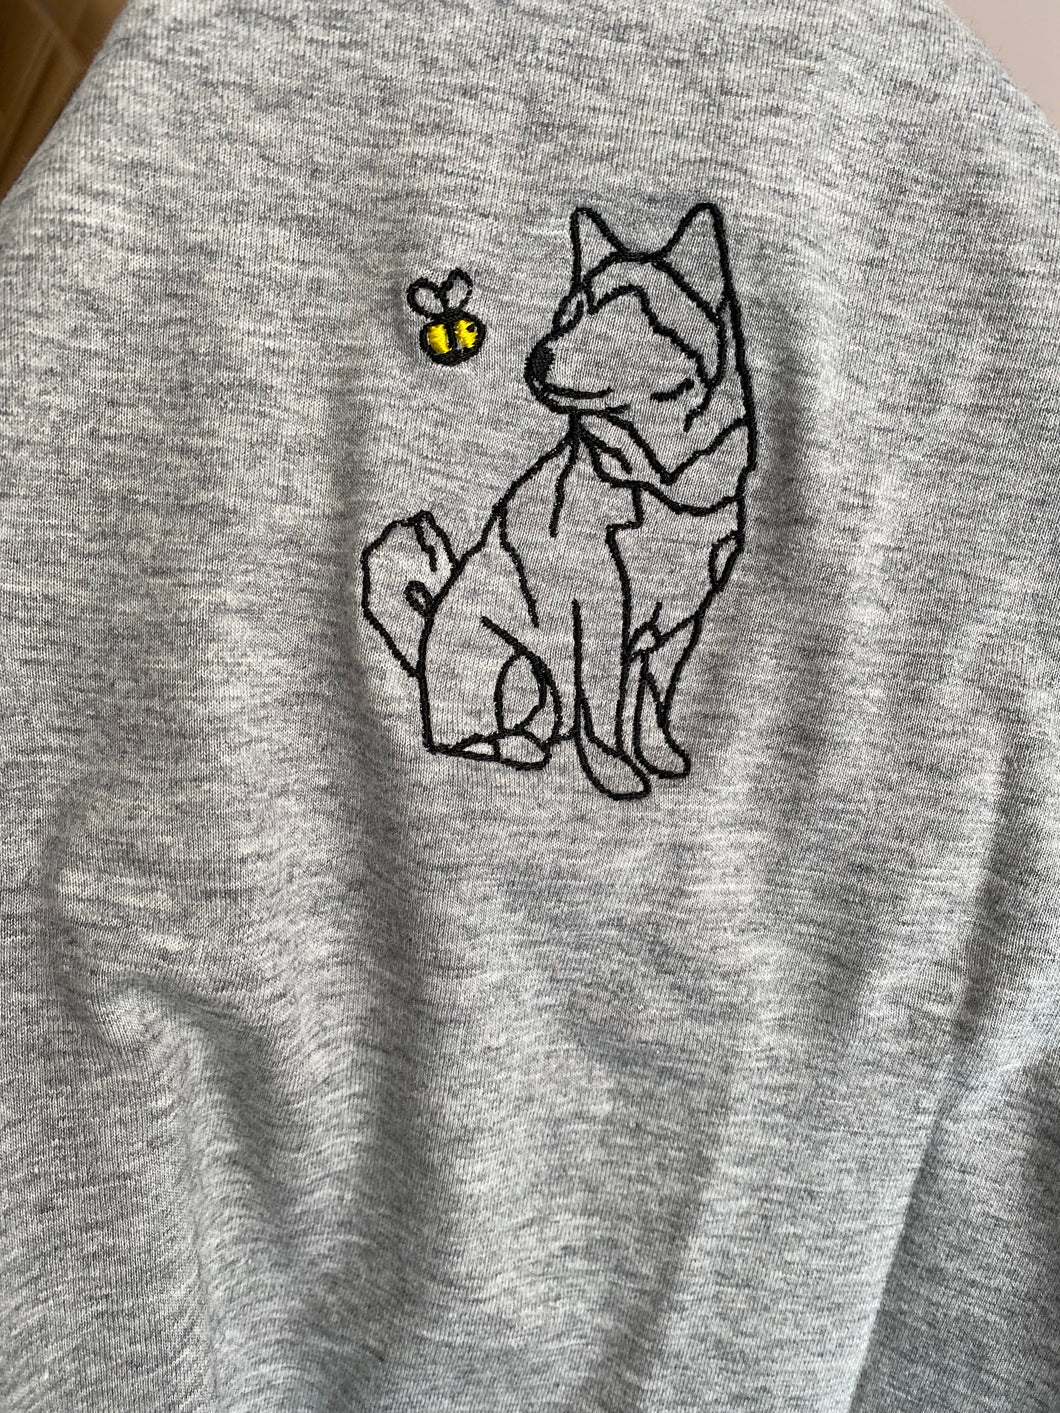 Spring Shiba Inu Outline Sweatshirt - Gifts for Boston owners and lovers.